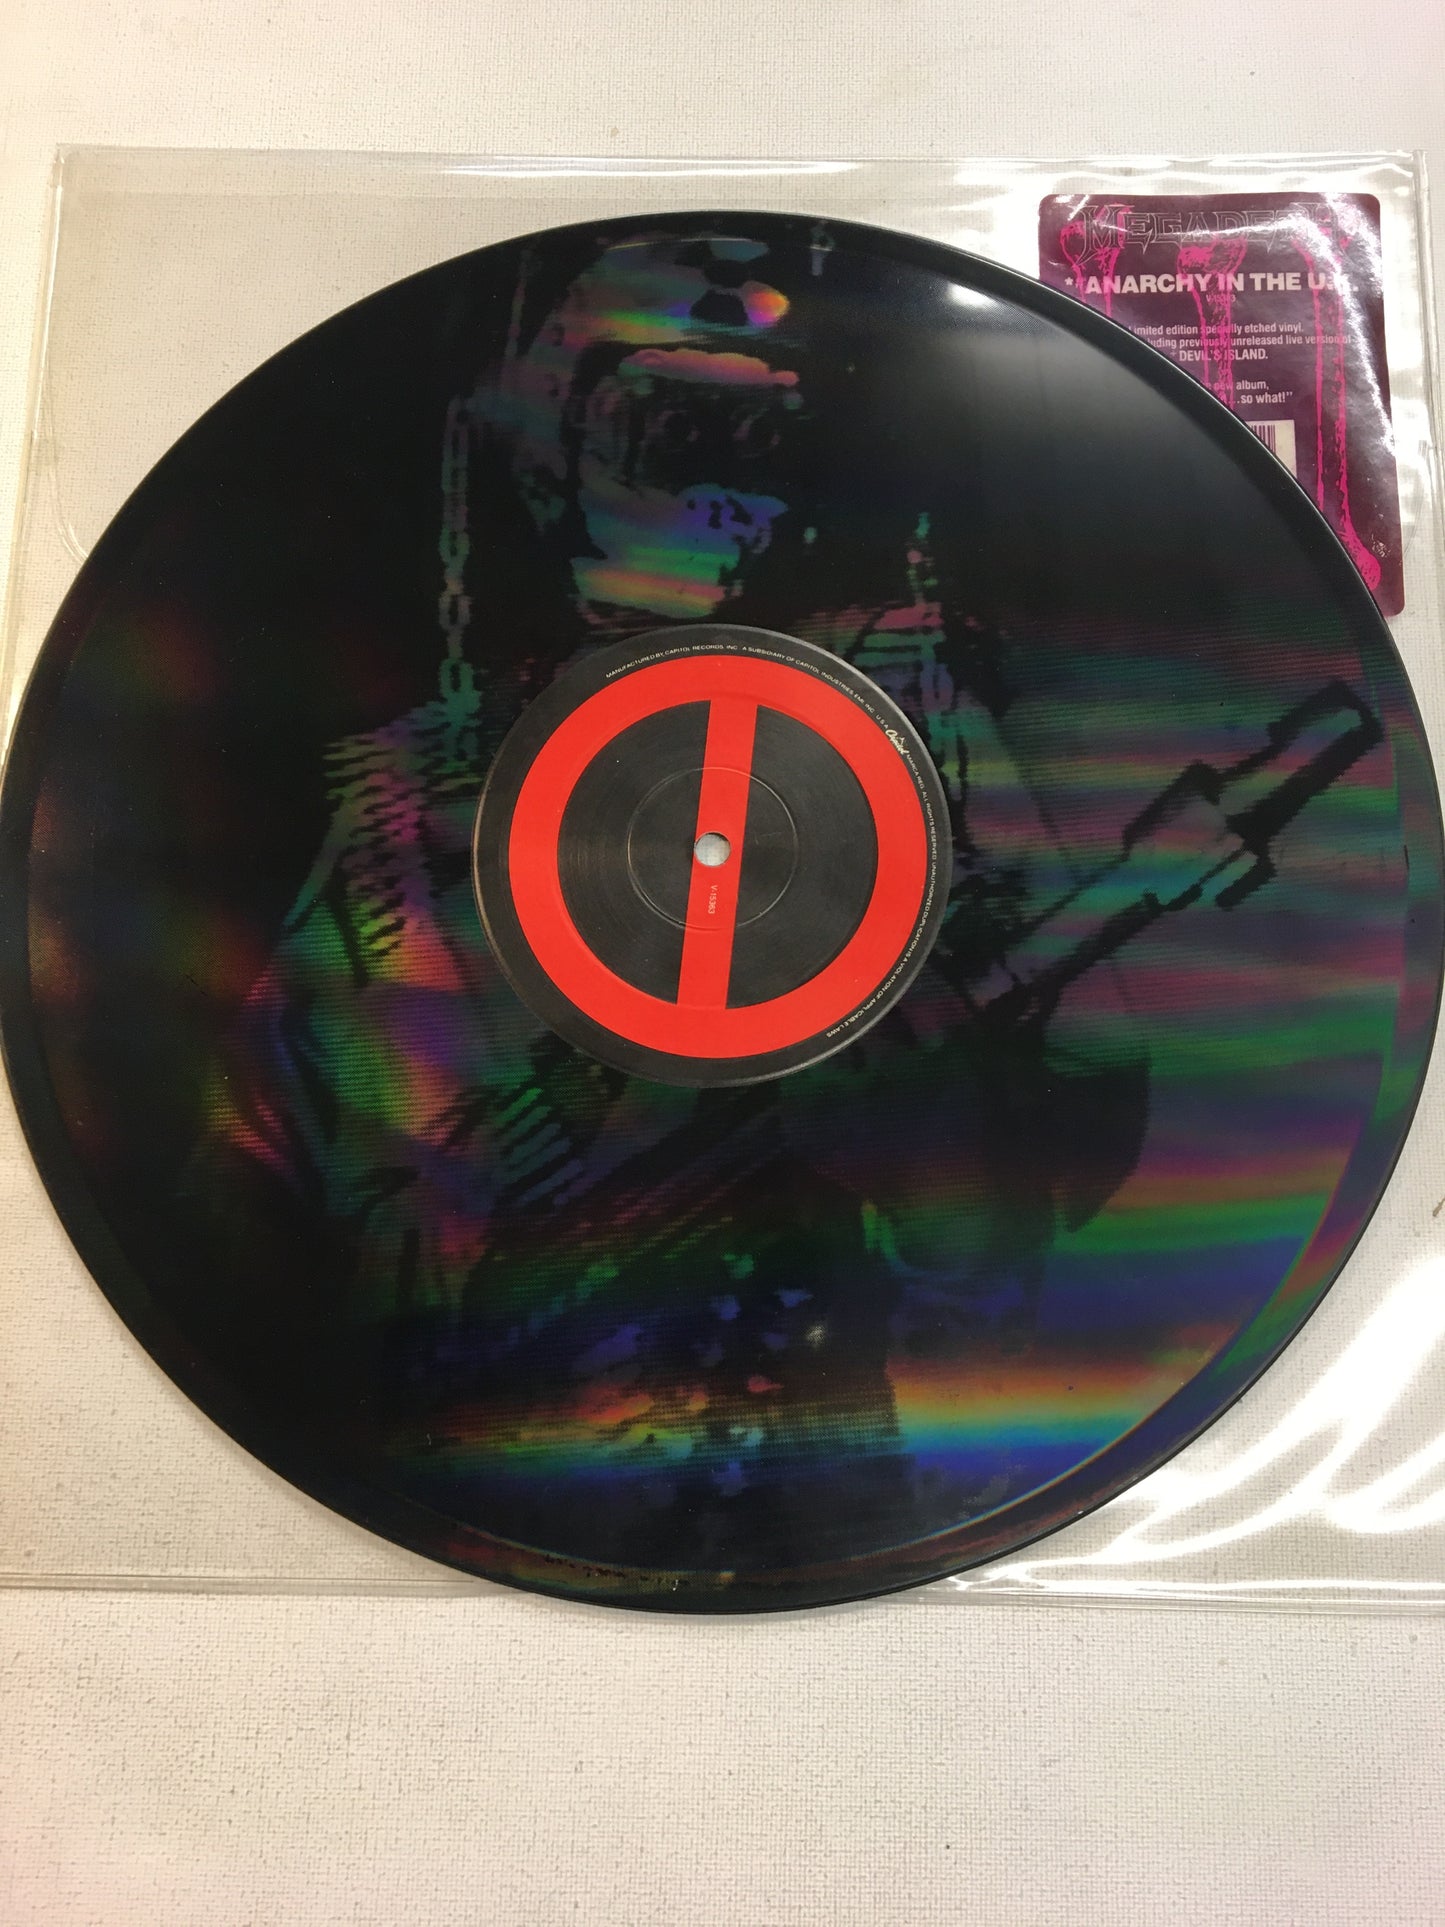 MEGADEATH 12” ETCHED ; ANARCHY IN THE UK